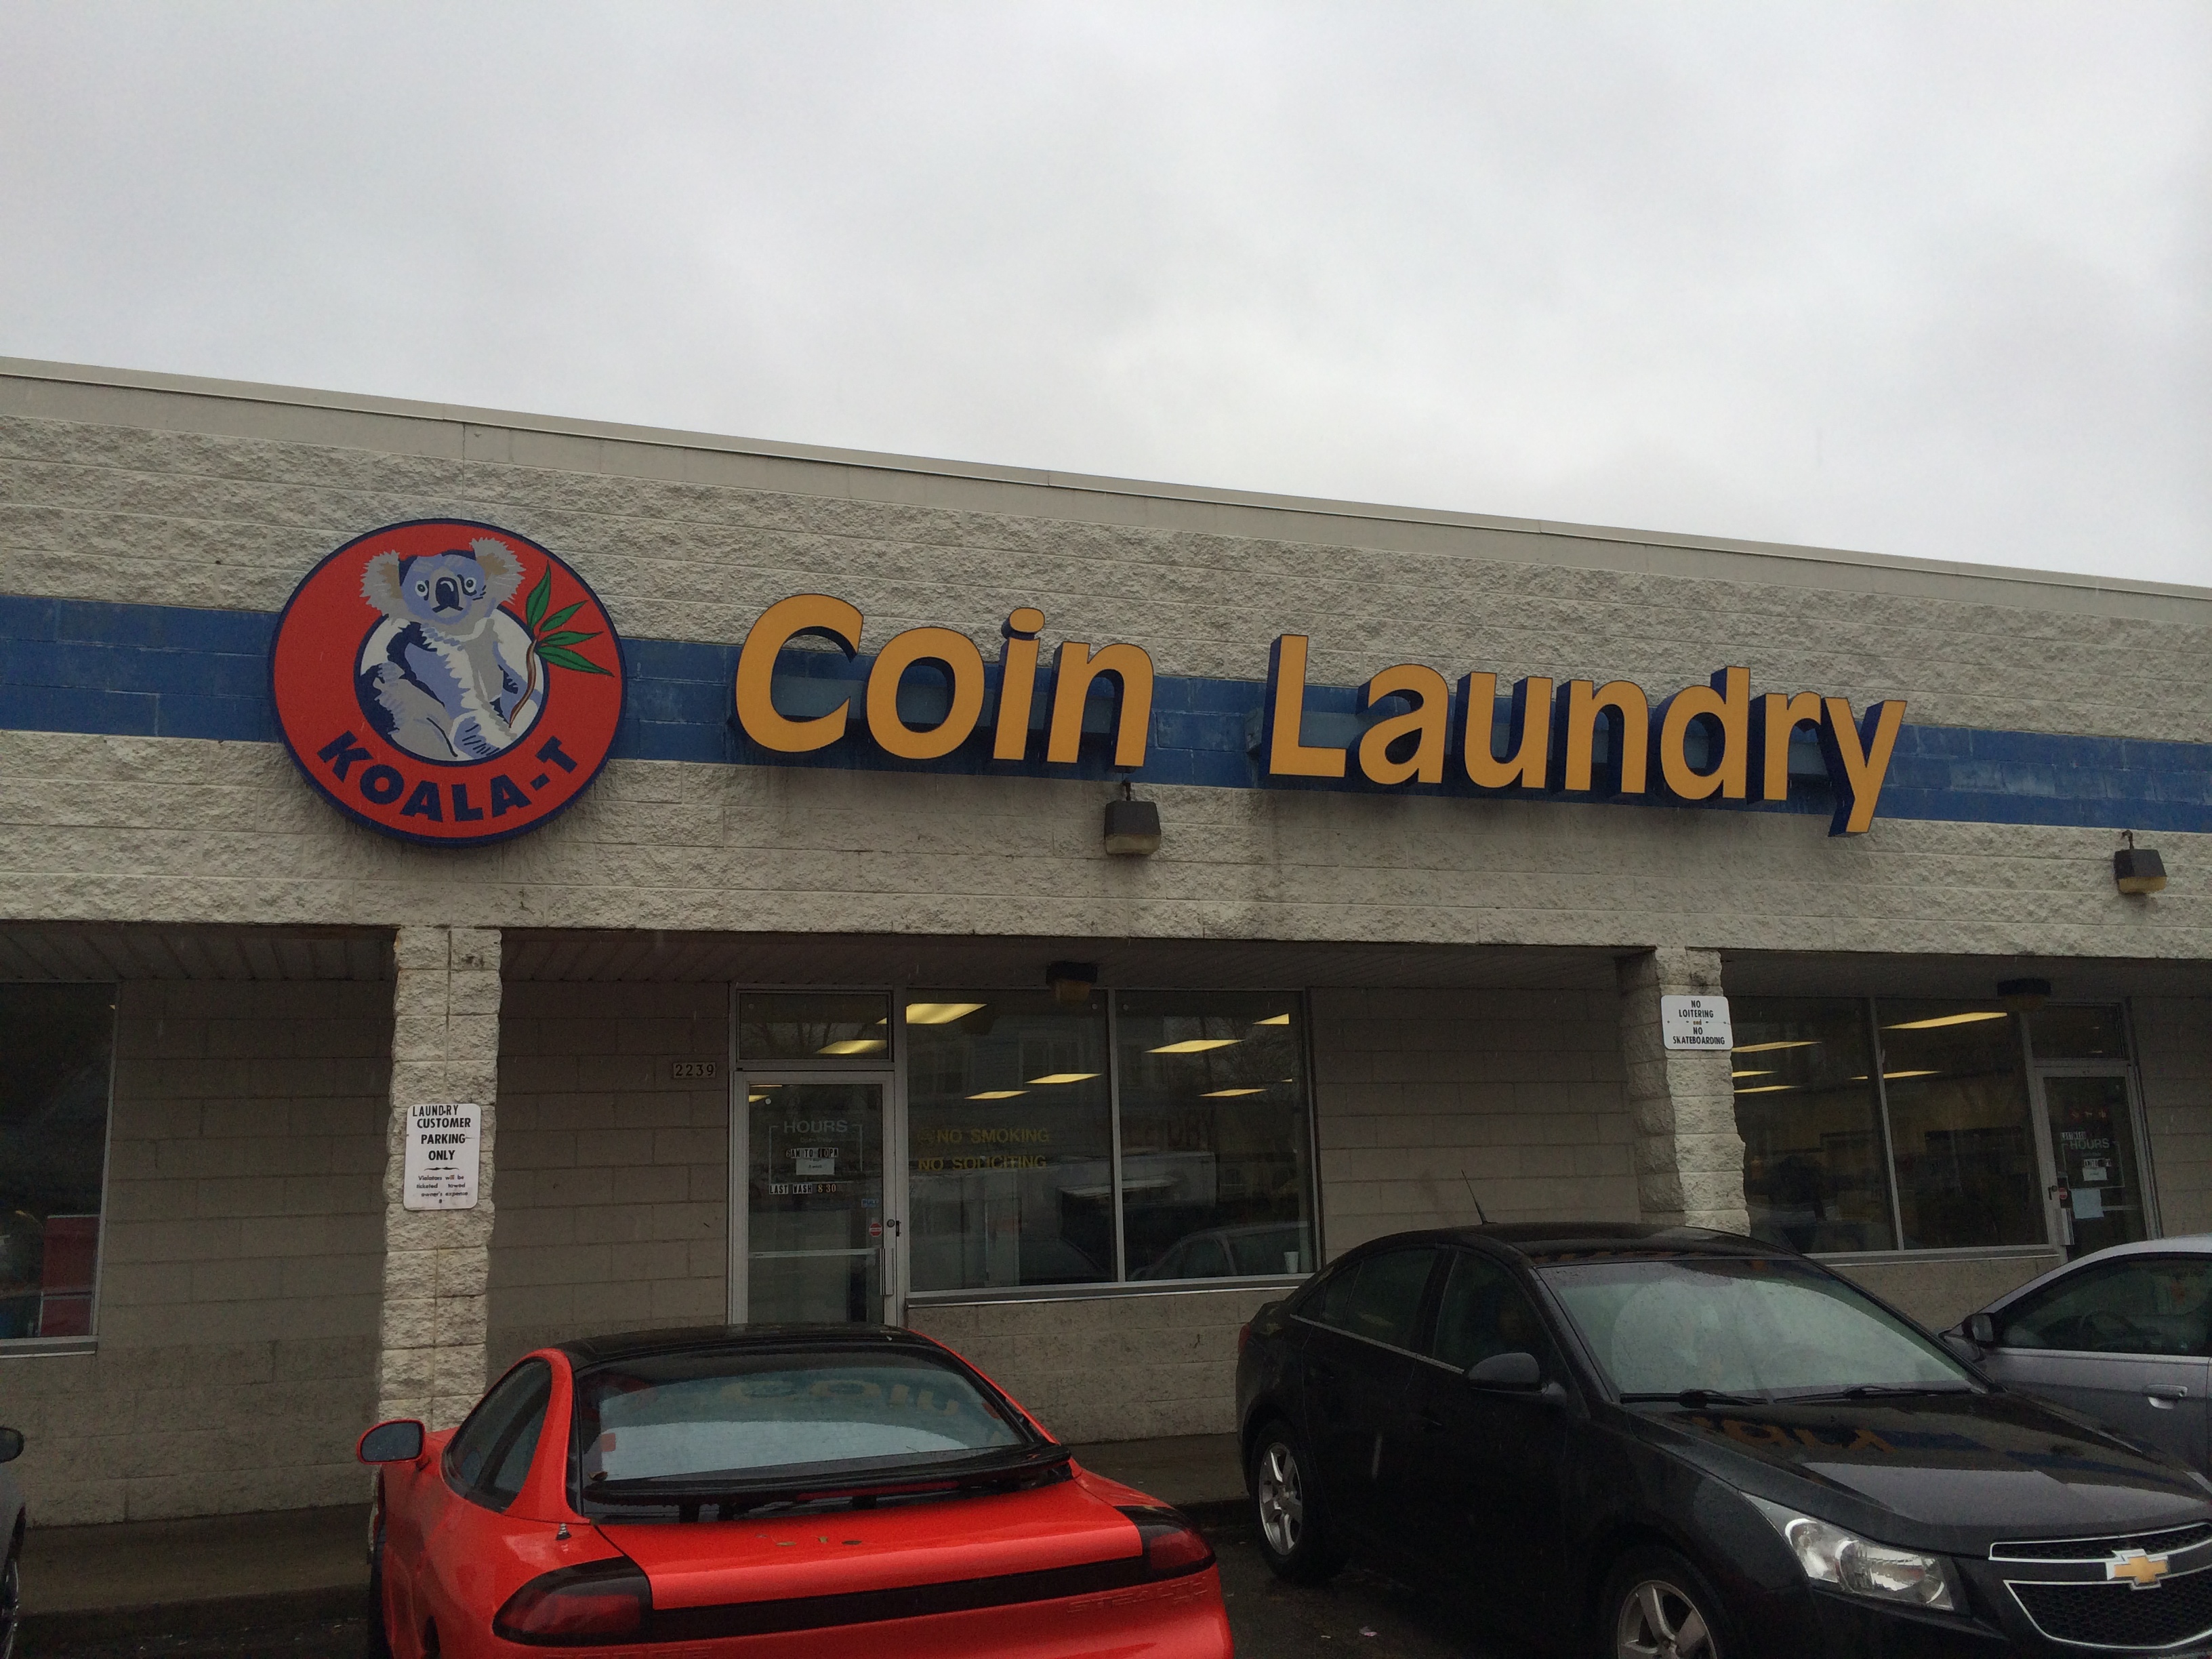 Looking for the best laundromat Milwaukee WI offers? Great, you are in the right place then! We are not only a great nearby laundromat in Milwaukee, we are the least expensive. We have a FREE Dry with every wash policy. When you wash your close at our coin laundry mat, you get to dry them for free. For those of you that are busy or really just don't like washing clothes, we also have a wash dry fold drop off laundry service. Our laundry drop off service is fast, convenient and affordable. Give it a try and let us know what you think today!